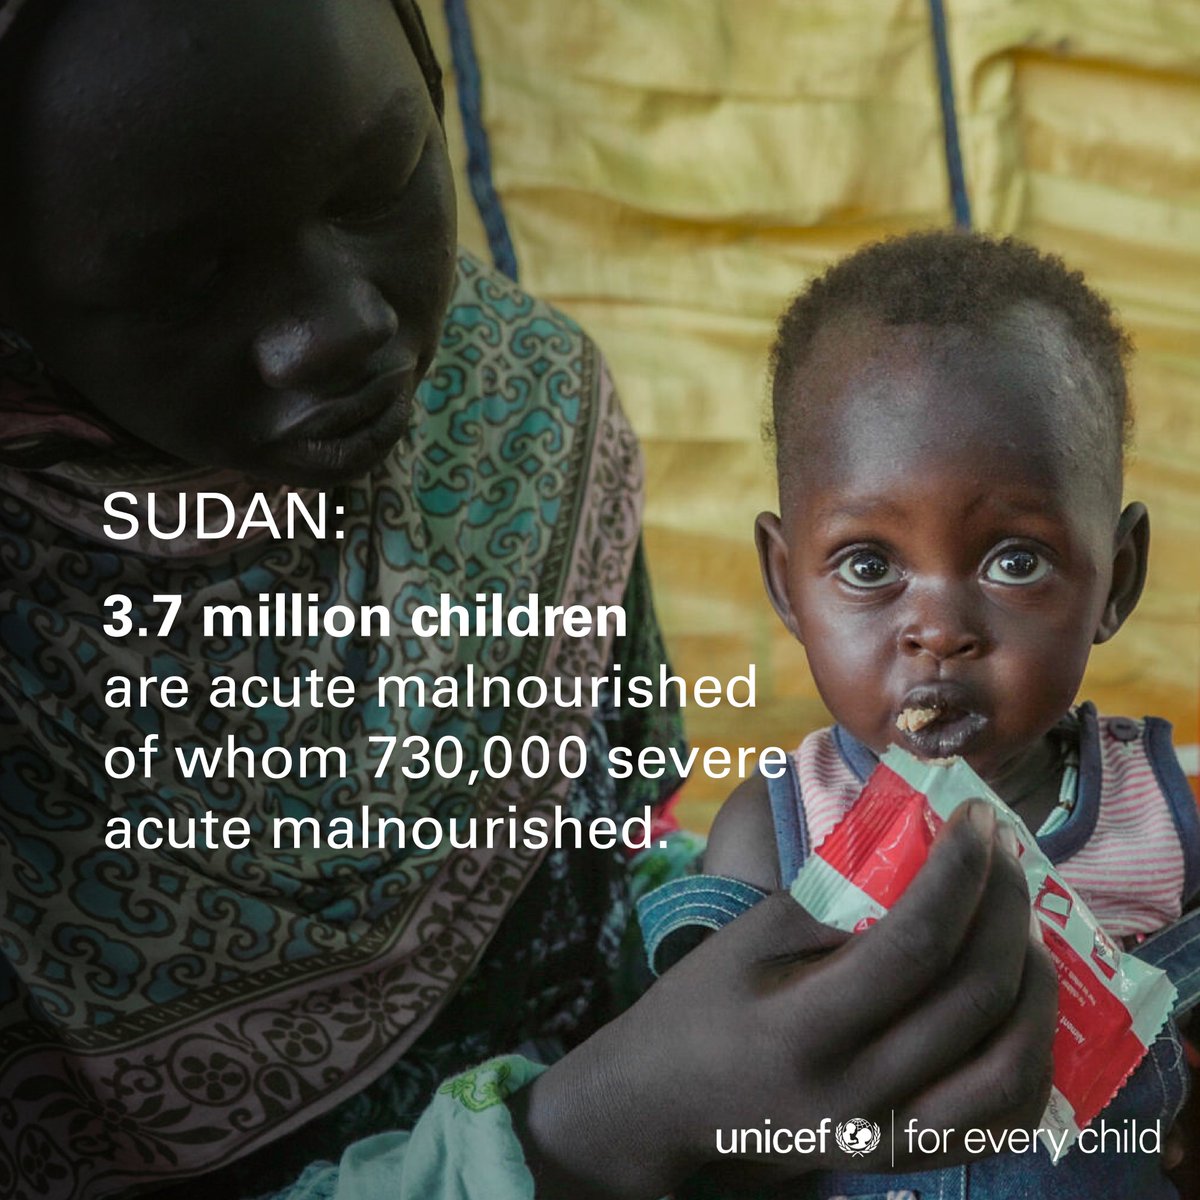 One year after the brutal war in #Sudan, hunger and undernutrition are threatening the lives of children. Sudan is facing a deepening nutrition crisis.​ Now is the time to act #ForEveryChild in Sudan.